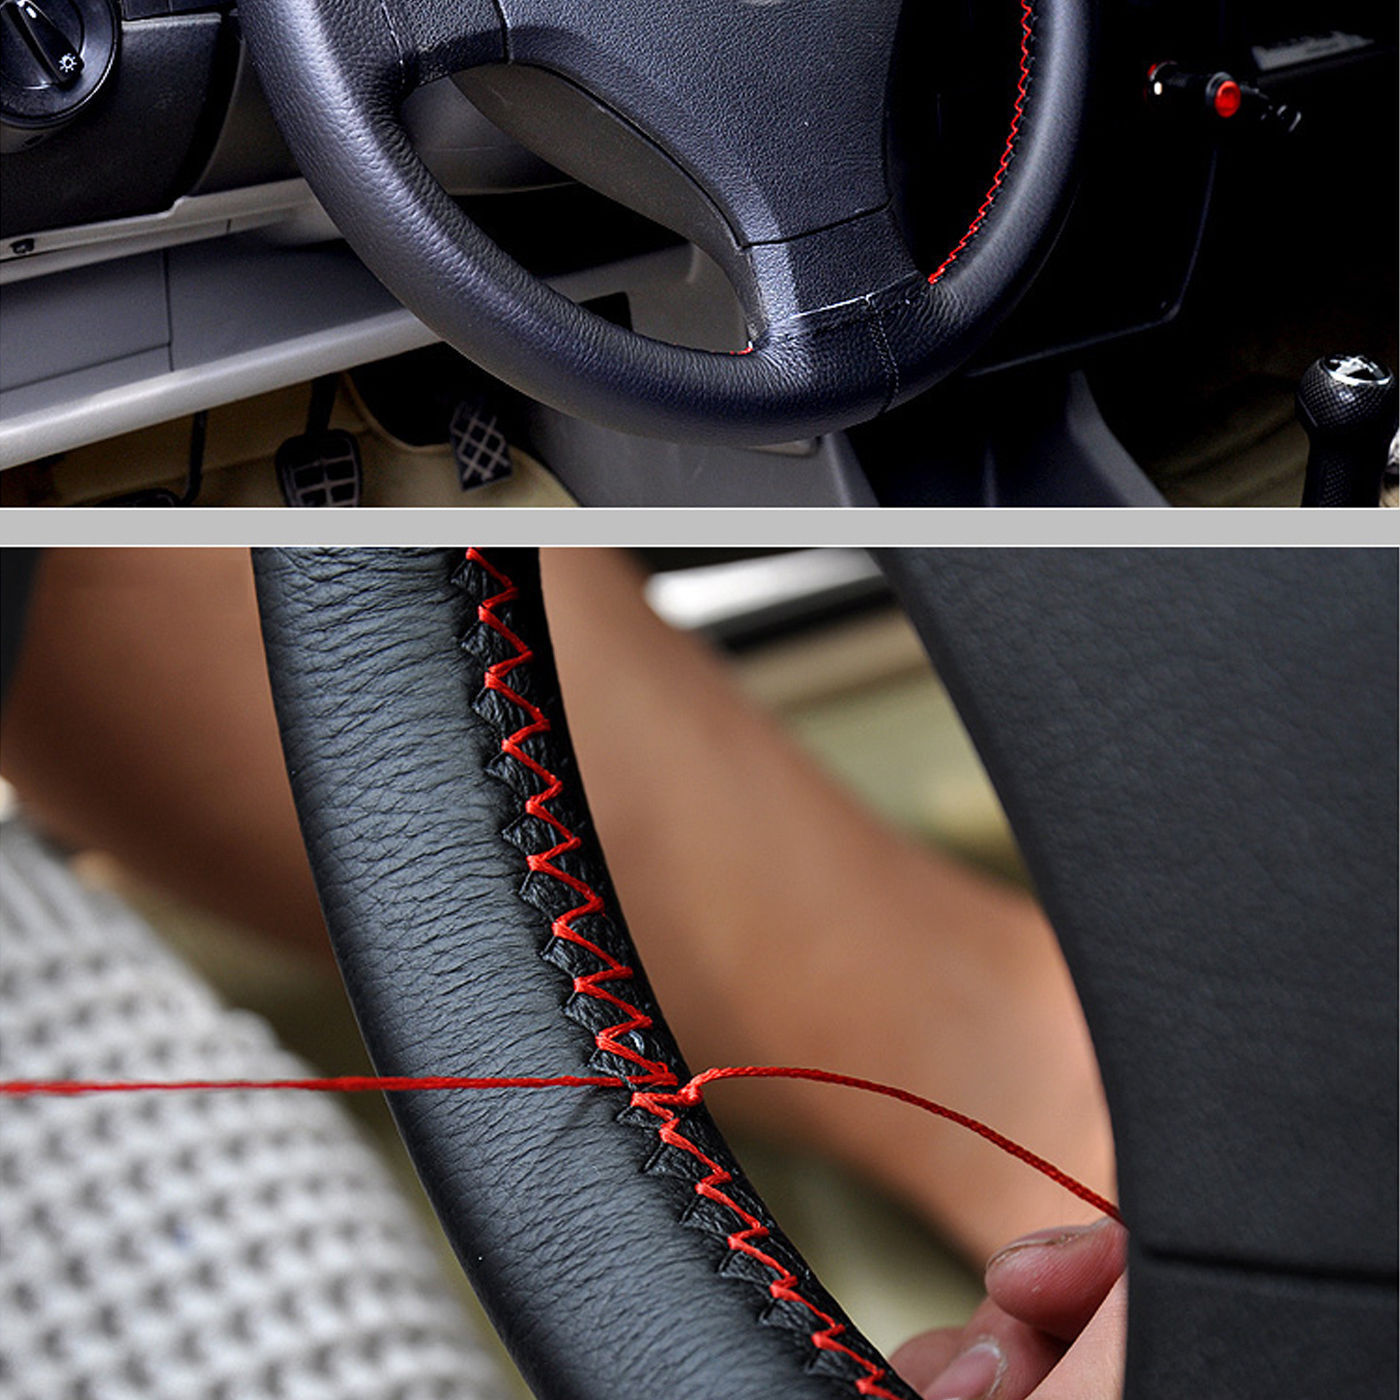 New DIY PU Leather Car Auto Steering Wheel Cover 38cm With Needles and Thread